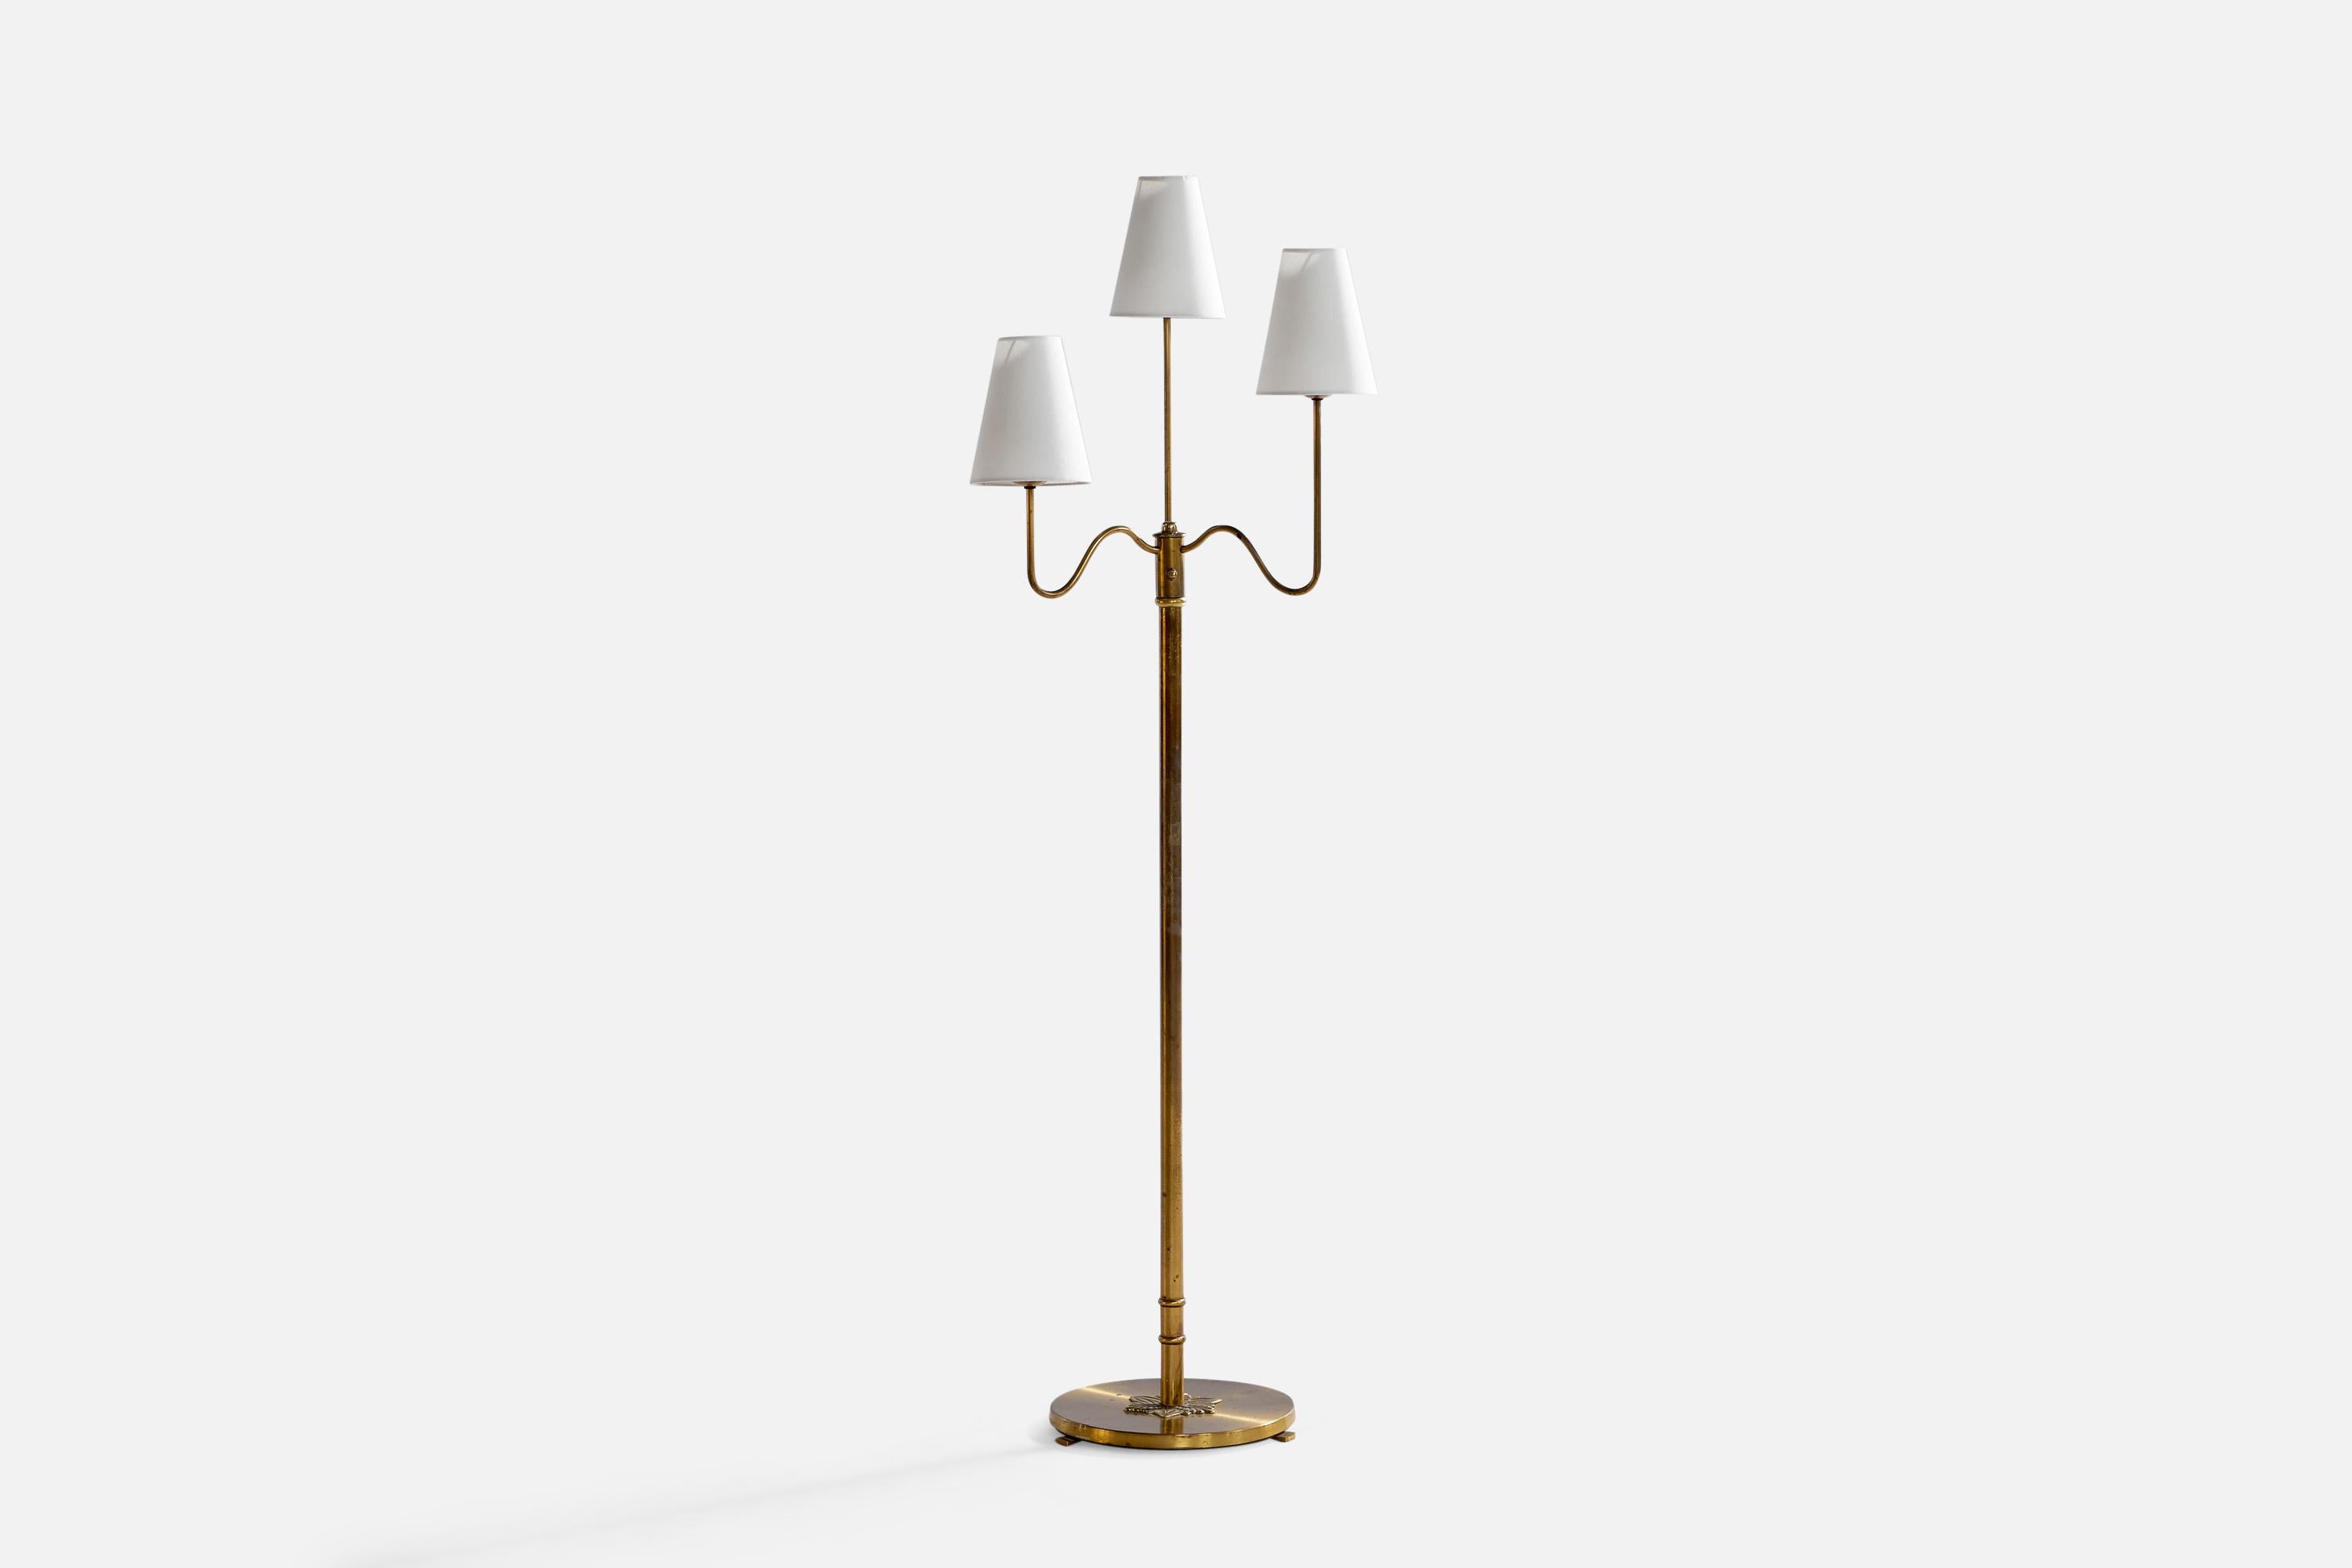 A three-armed brass and white fabric floor designed and produced in Sweden, 1930s.

Overall Dimensions (inches): 58.75” H x 19” W x 13.5”. Stated dimensions include shades.
Bulb Specifications: E-26 Bulbs
Number of Sockets: 3
All lighting will be